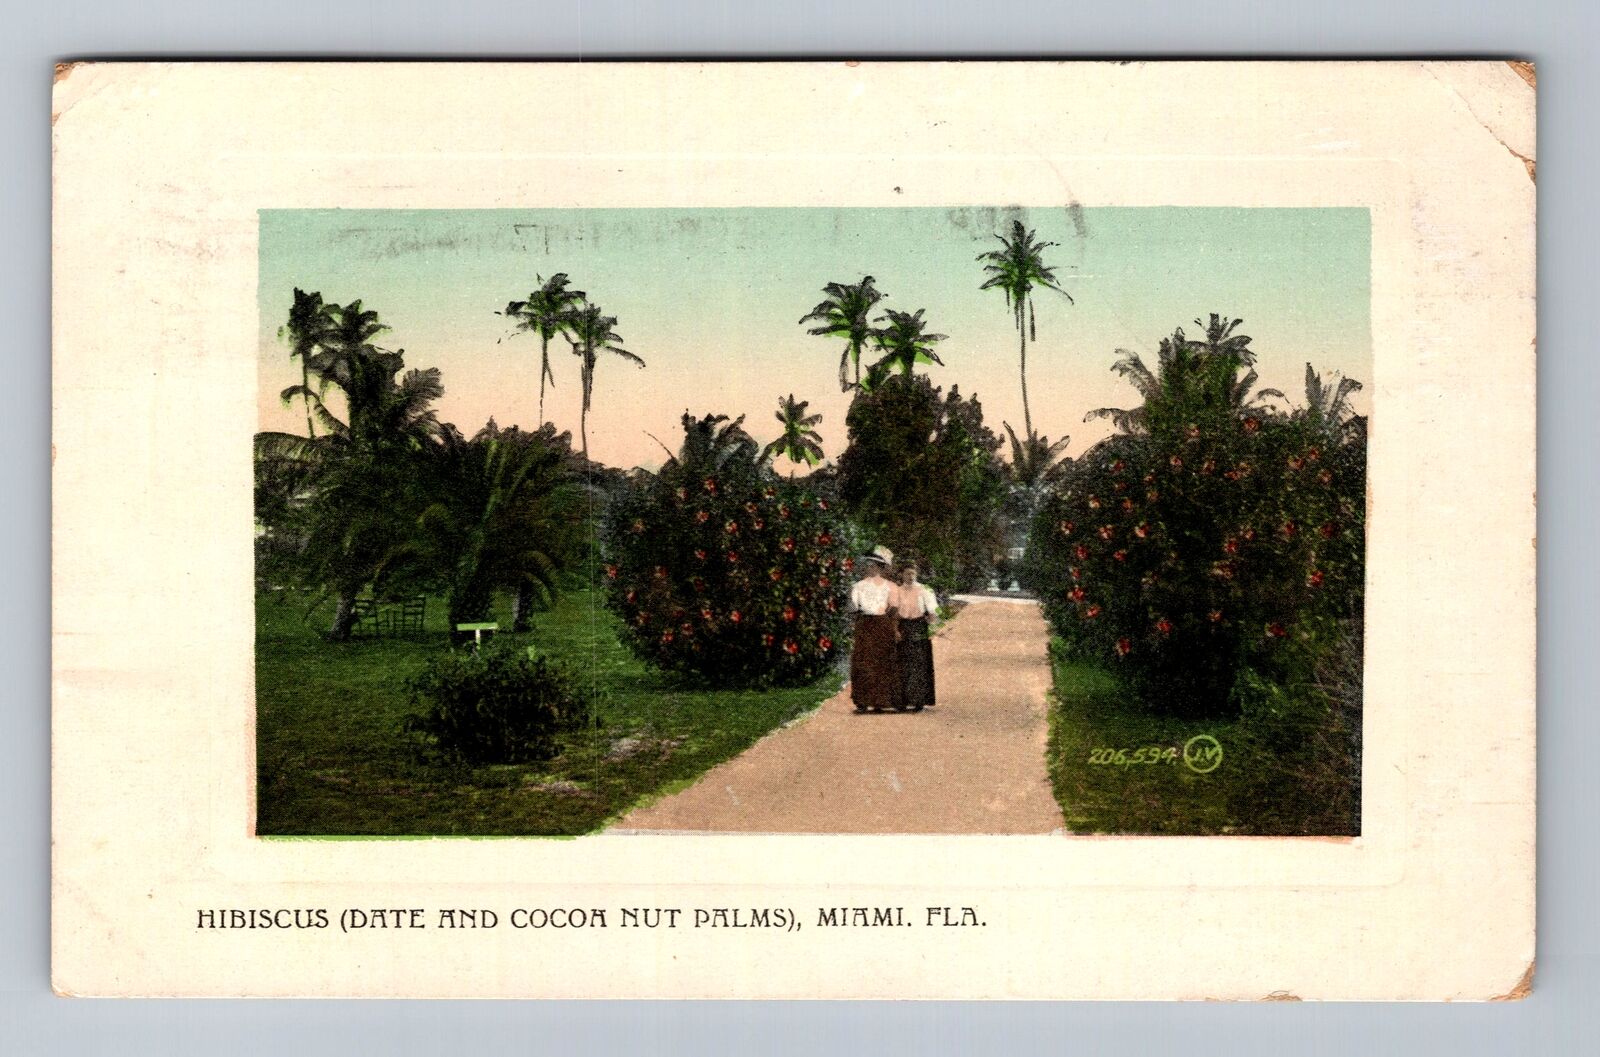 Miami FL-Florida, Hibiscus, Date and Cocoa Nut Palms, Vintage Postcard